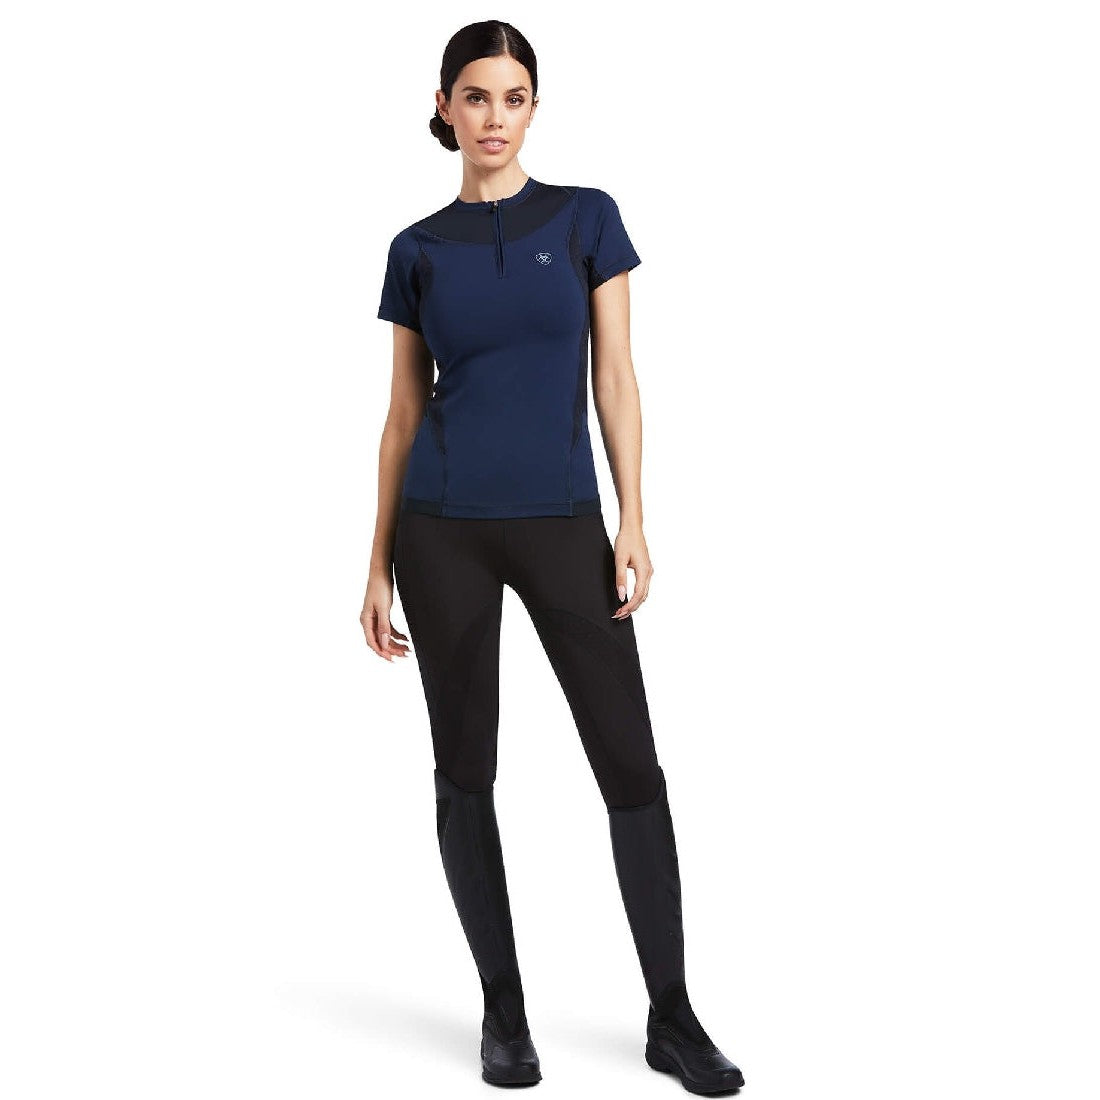 Baselayer Ariat Ascent Short Sleeve Navy Ladies-Ascot Saddlery-The Equestrian